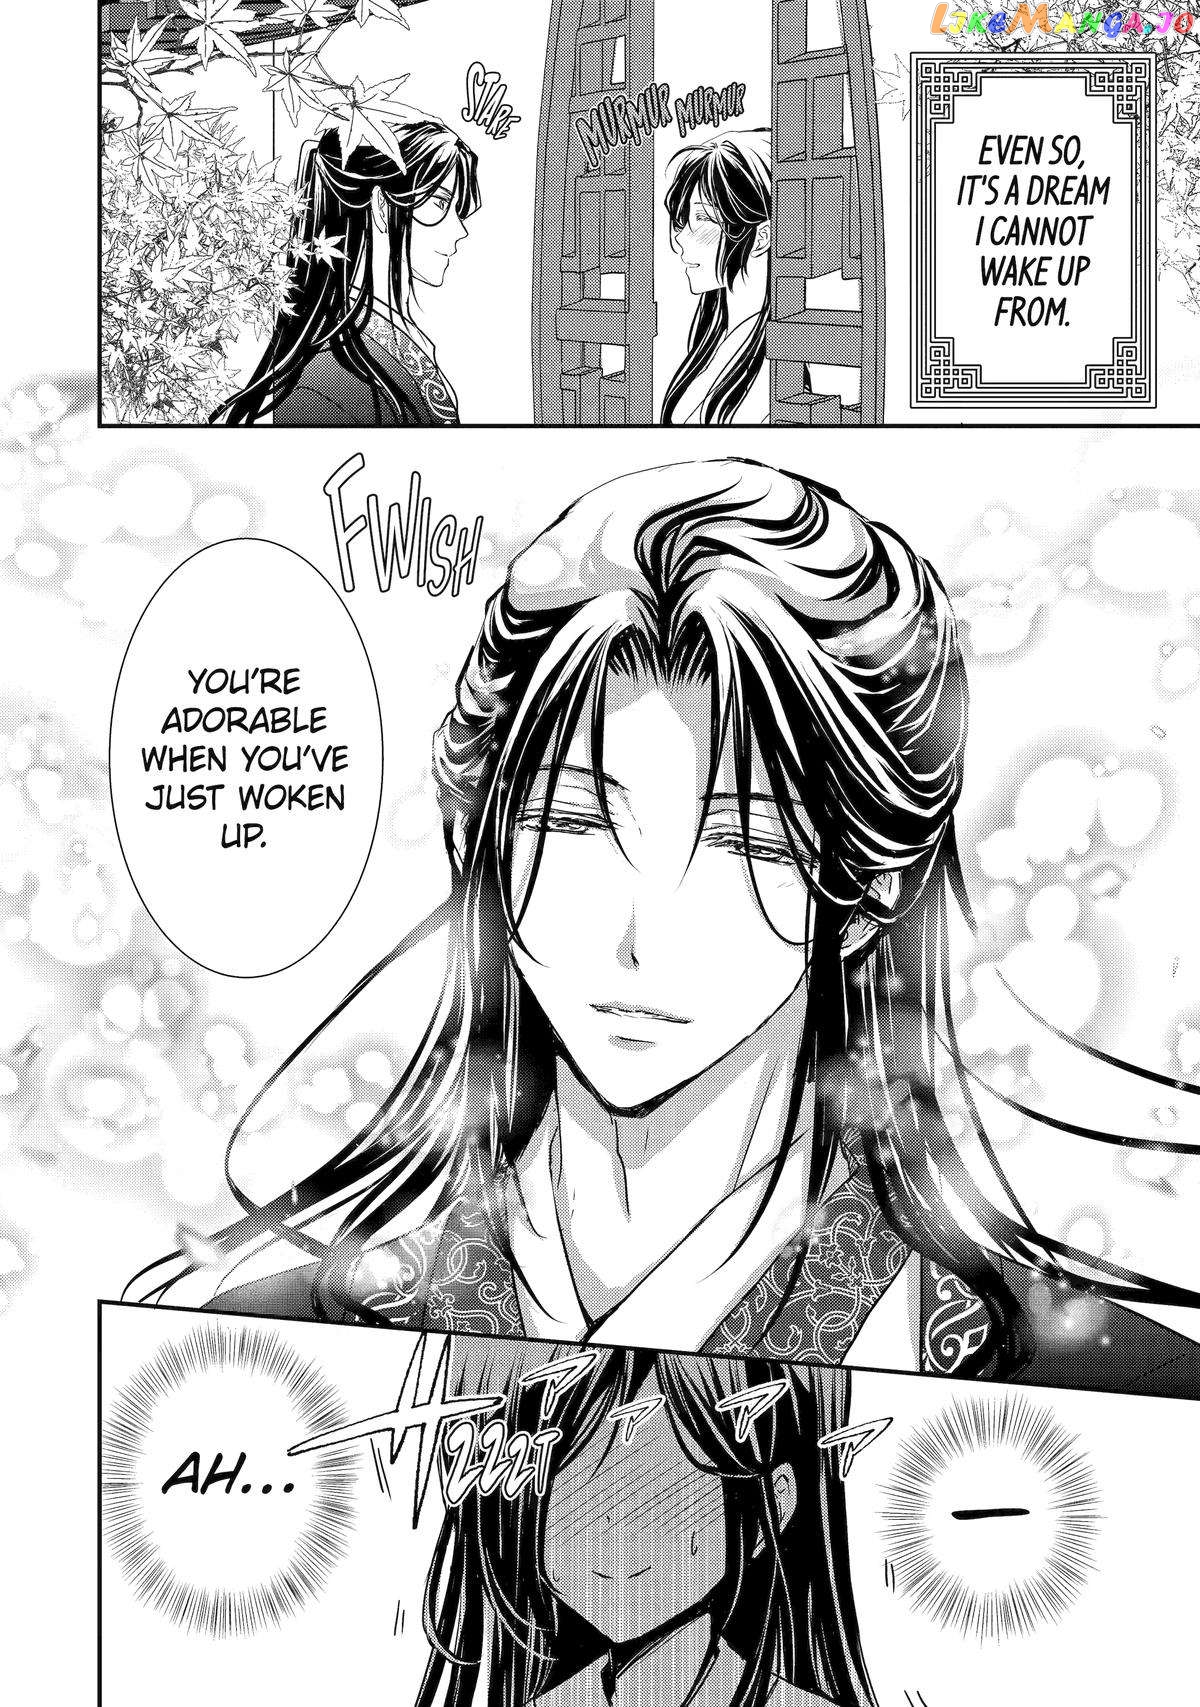 The Emperor's Caretaker: I'm Too Happy Living as a Lady-in-Waiting to Leave the Palace chapter 18 - page 6